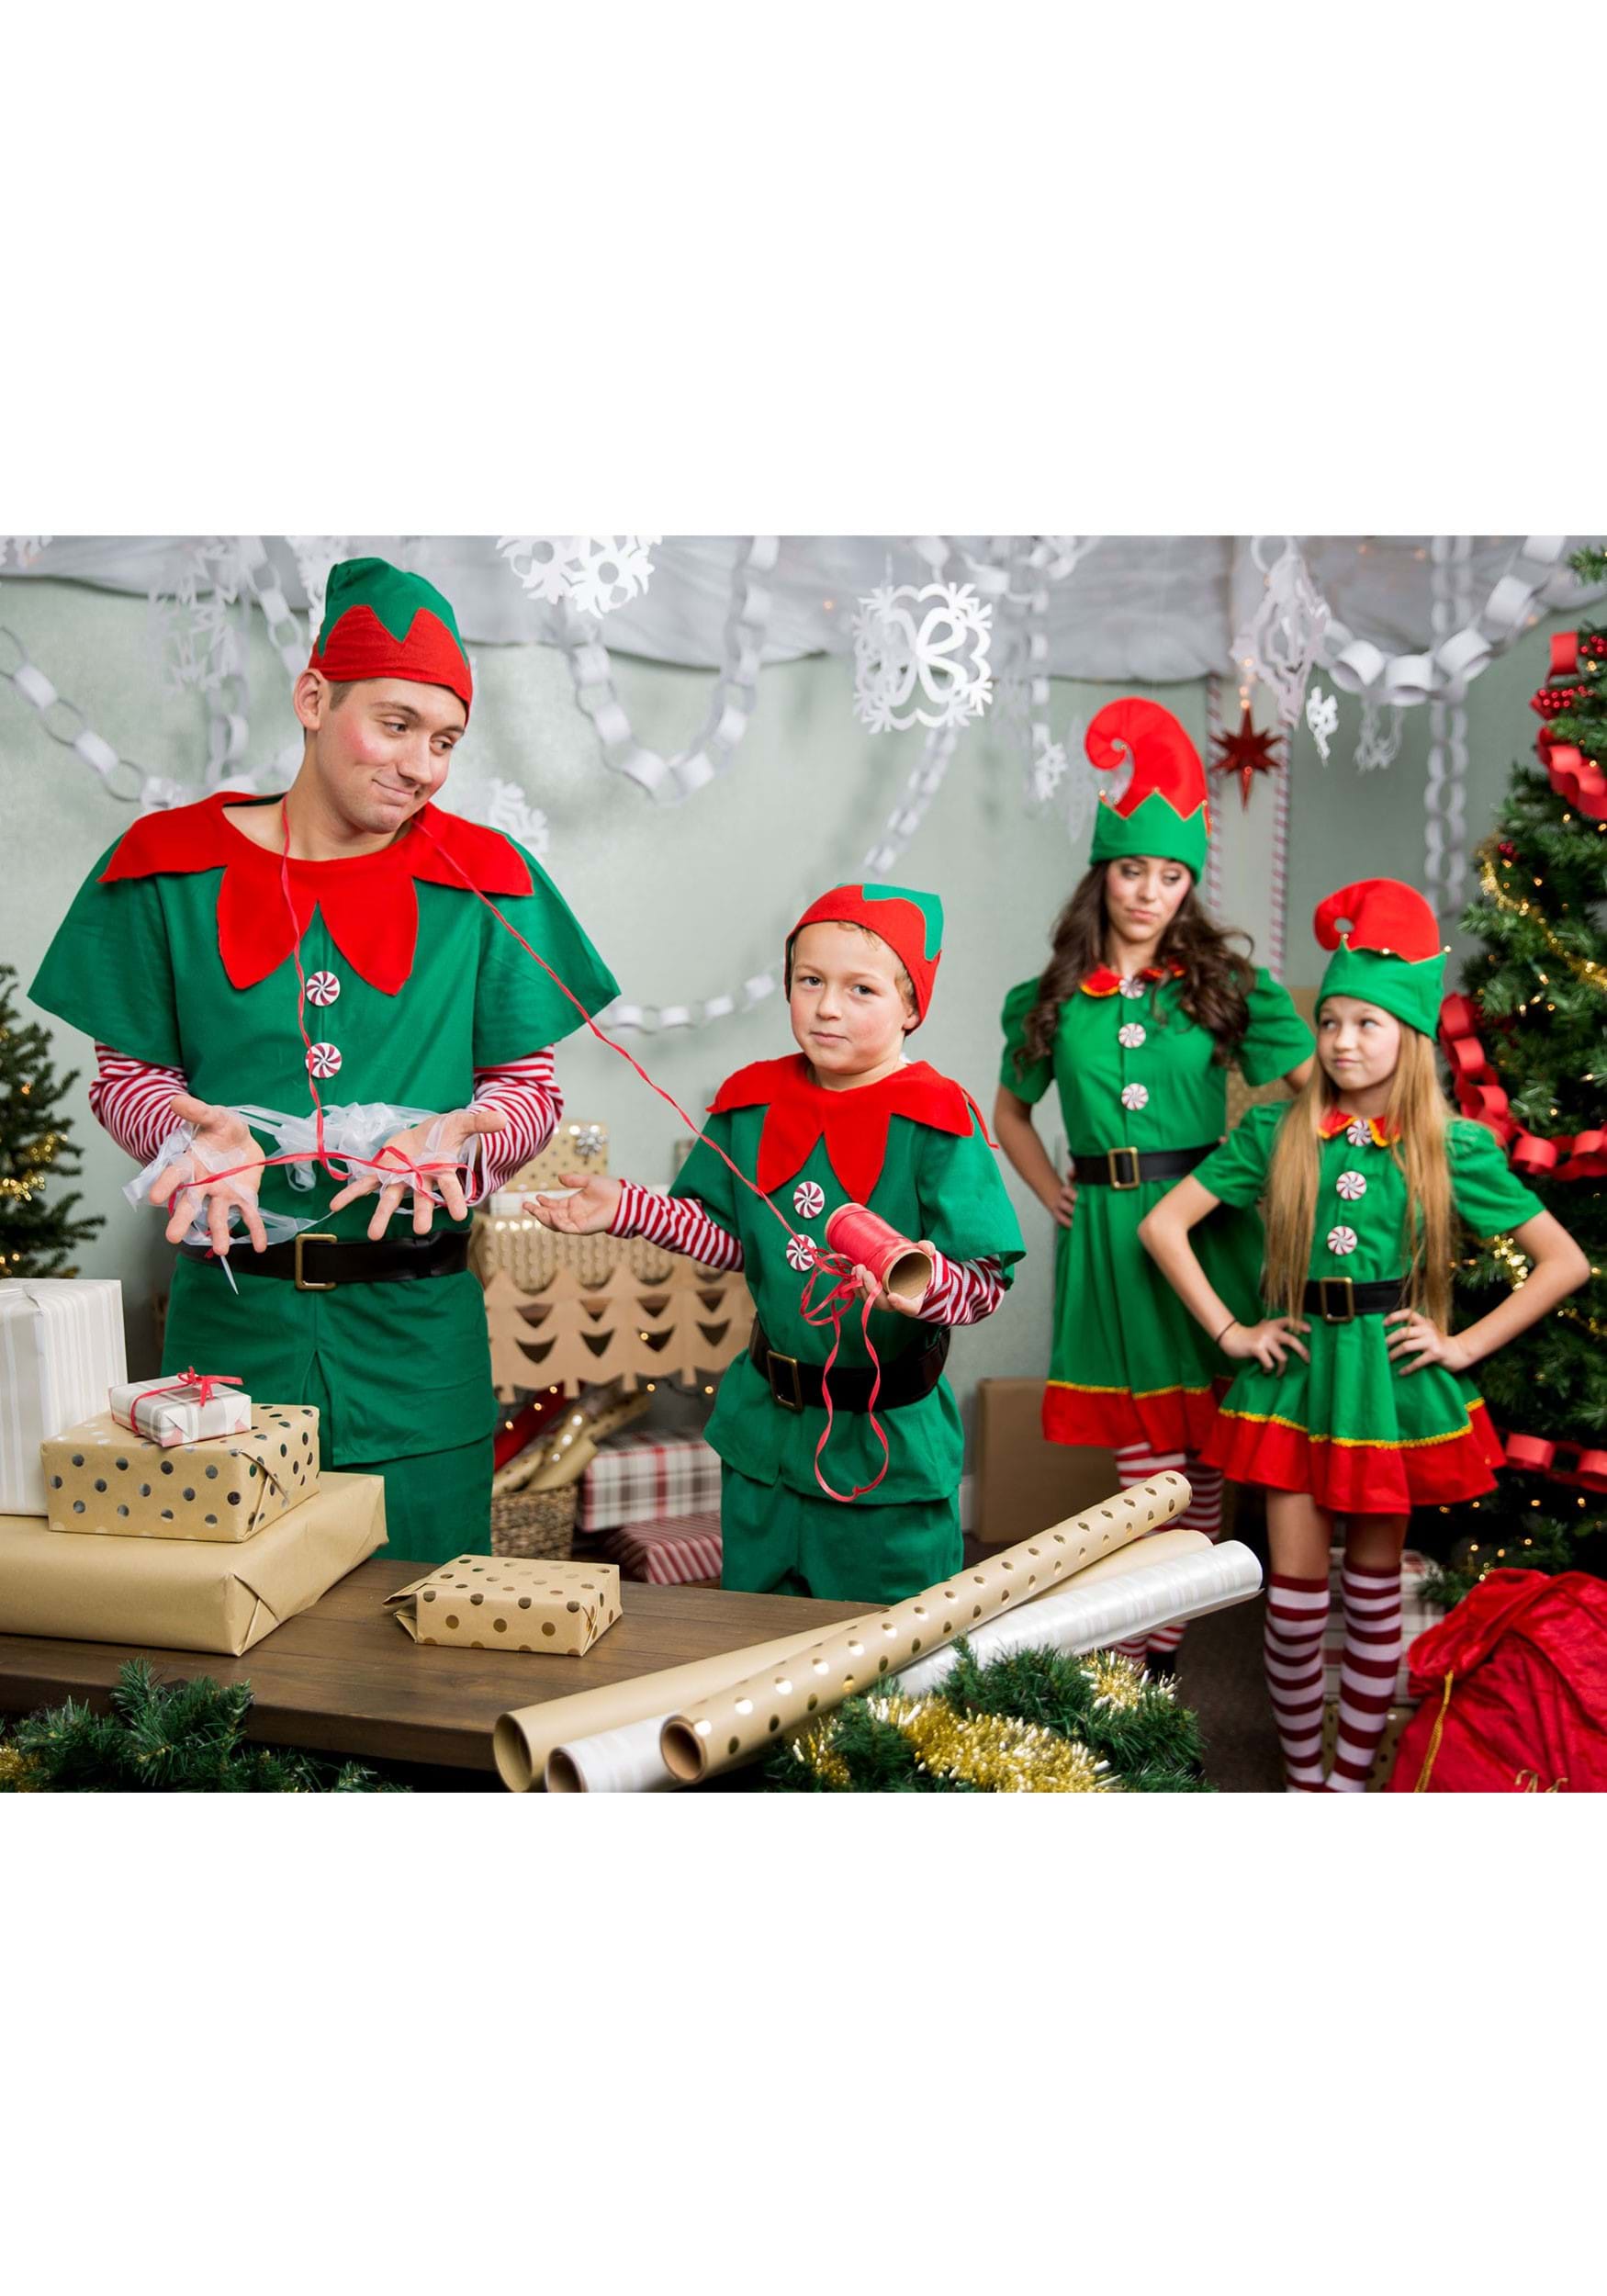 Plus Size Holiday Elf Costume For Women